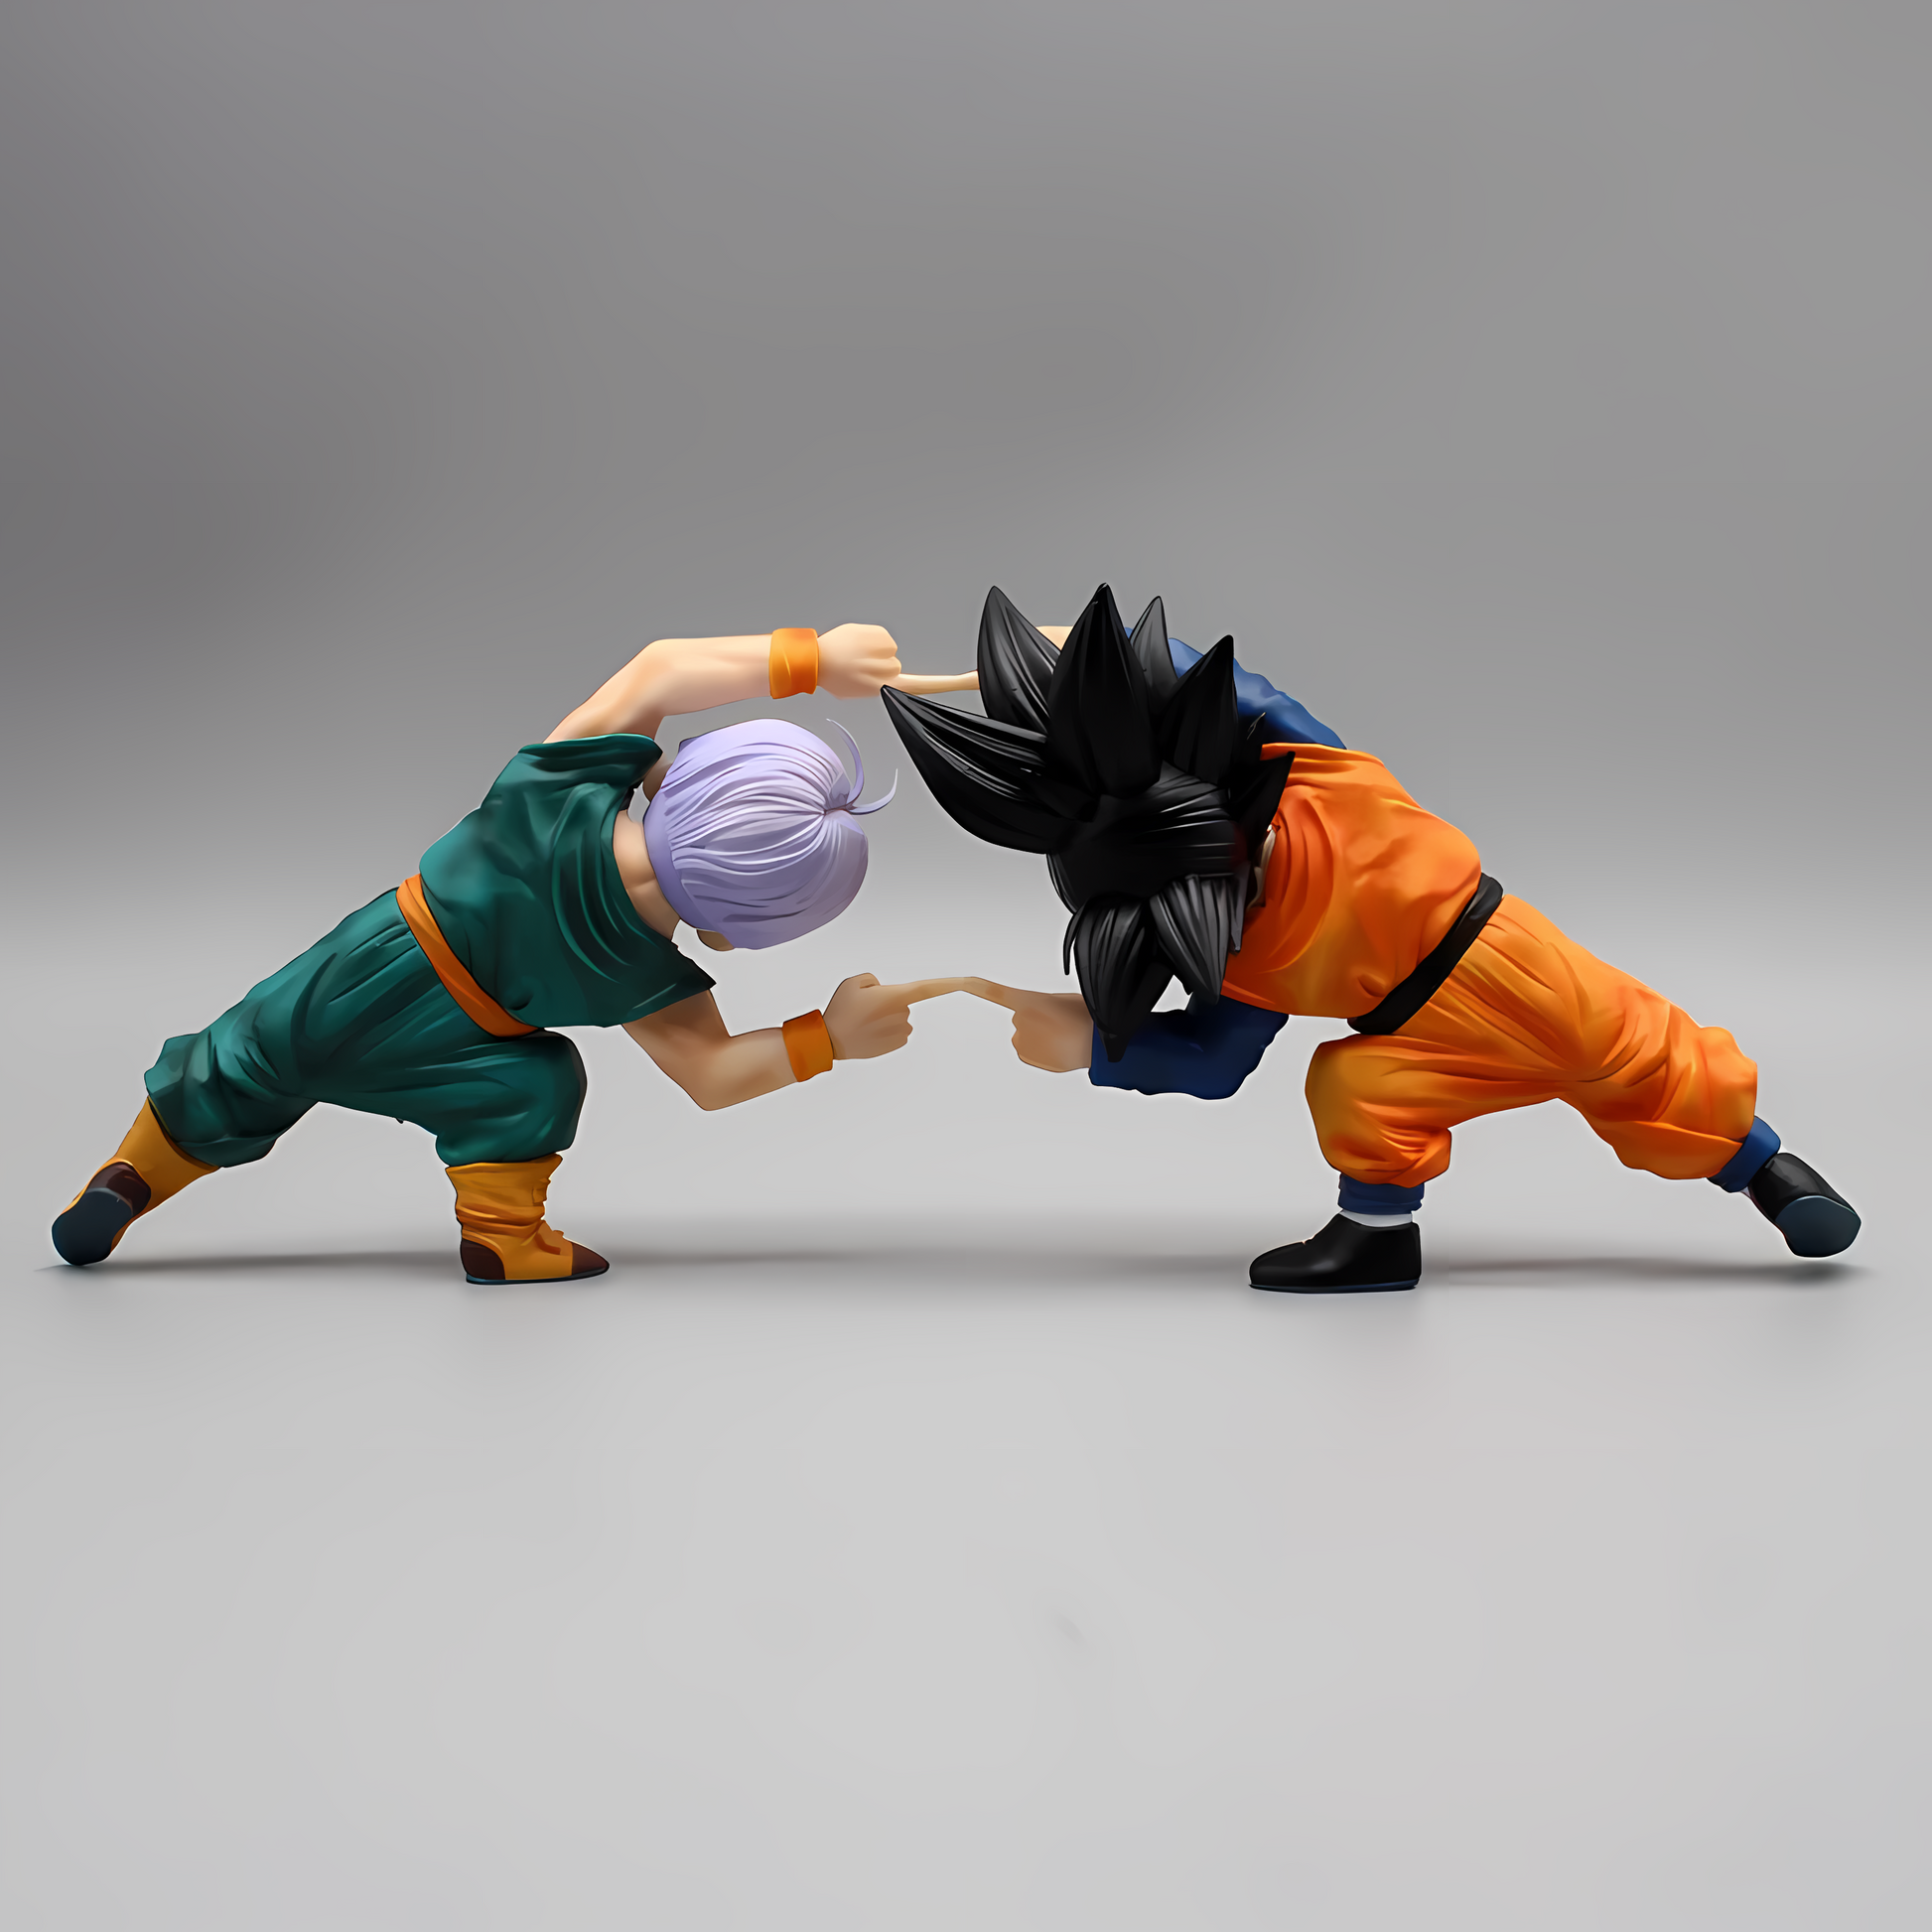 Energetic Dragon Ball collectible figures of Goten and Trunks engaging in the iconic fusion dance with vibrant enthusiasm against an interstellar space background.